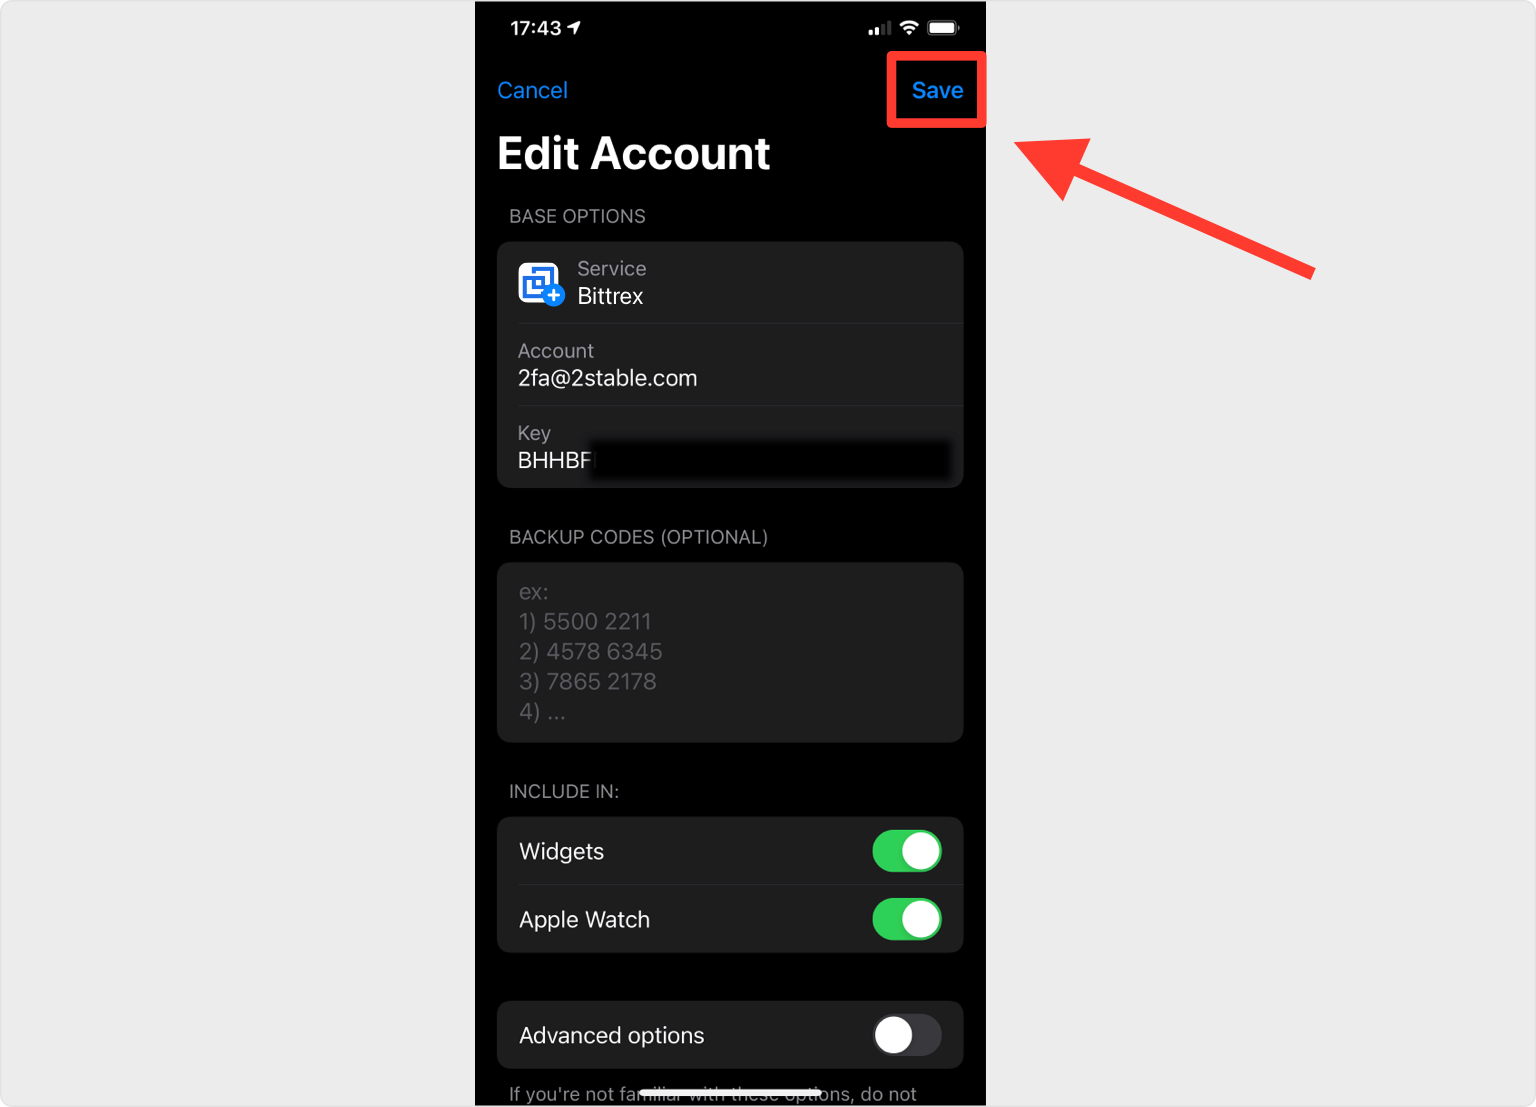 How to Enable Two Factor Authentication on the Bittrex Exchange?